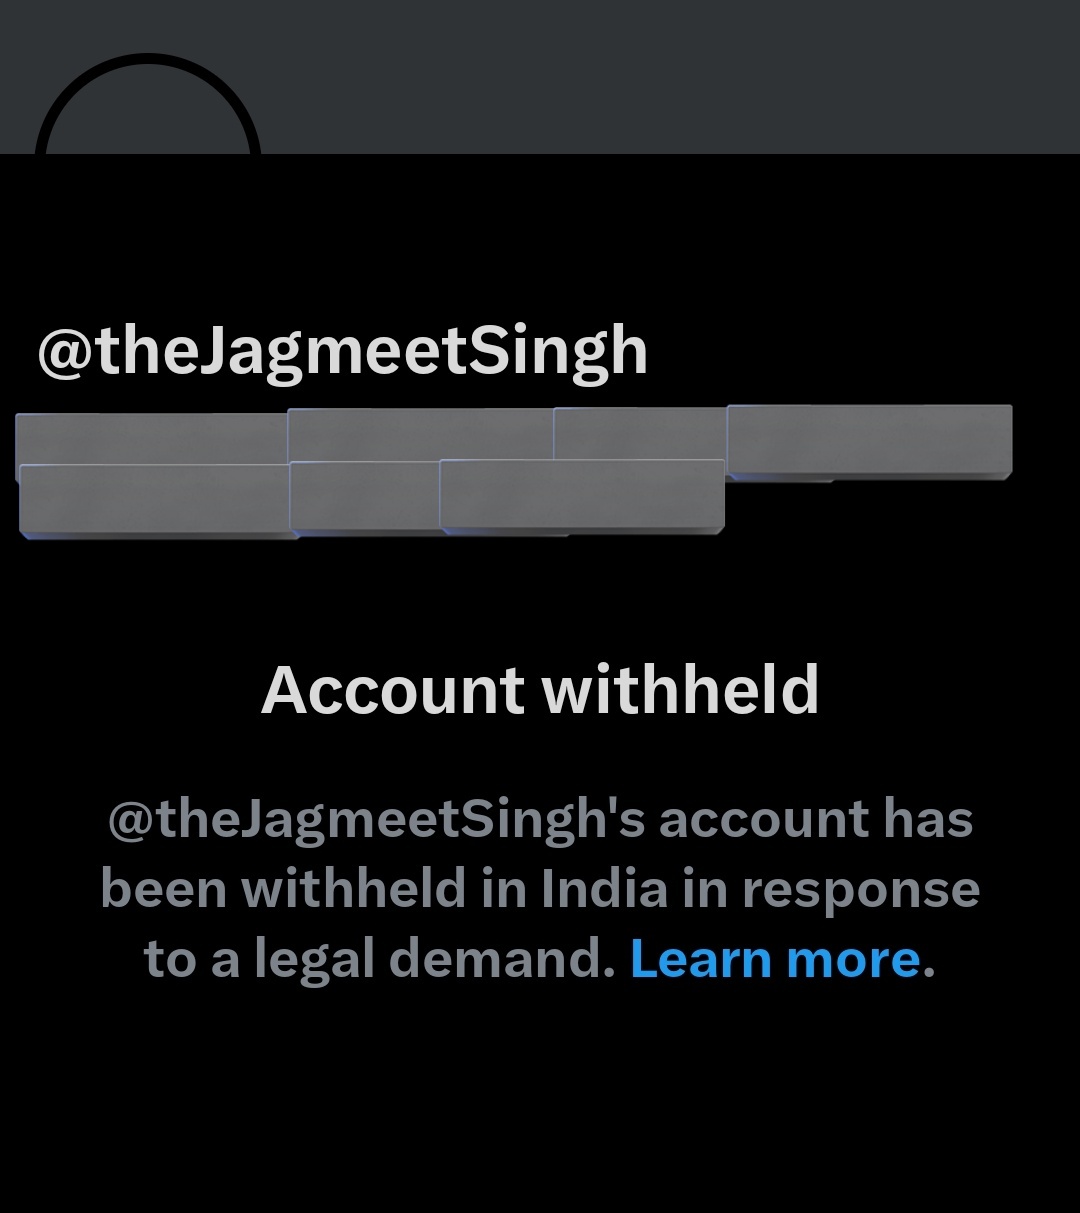 jagmeet singh twitter account withheld